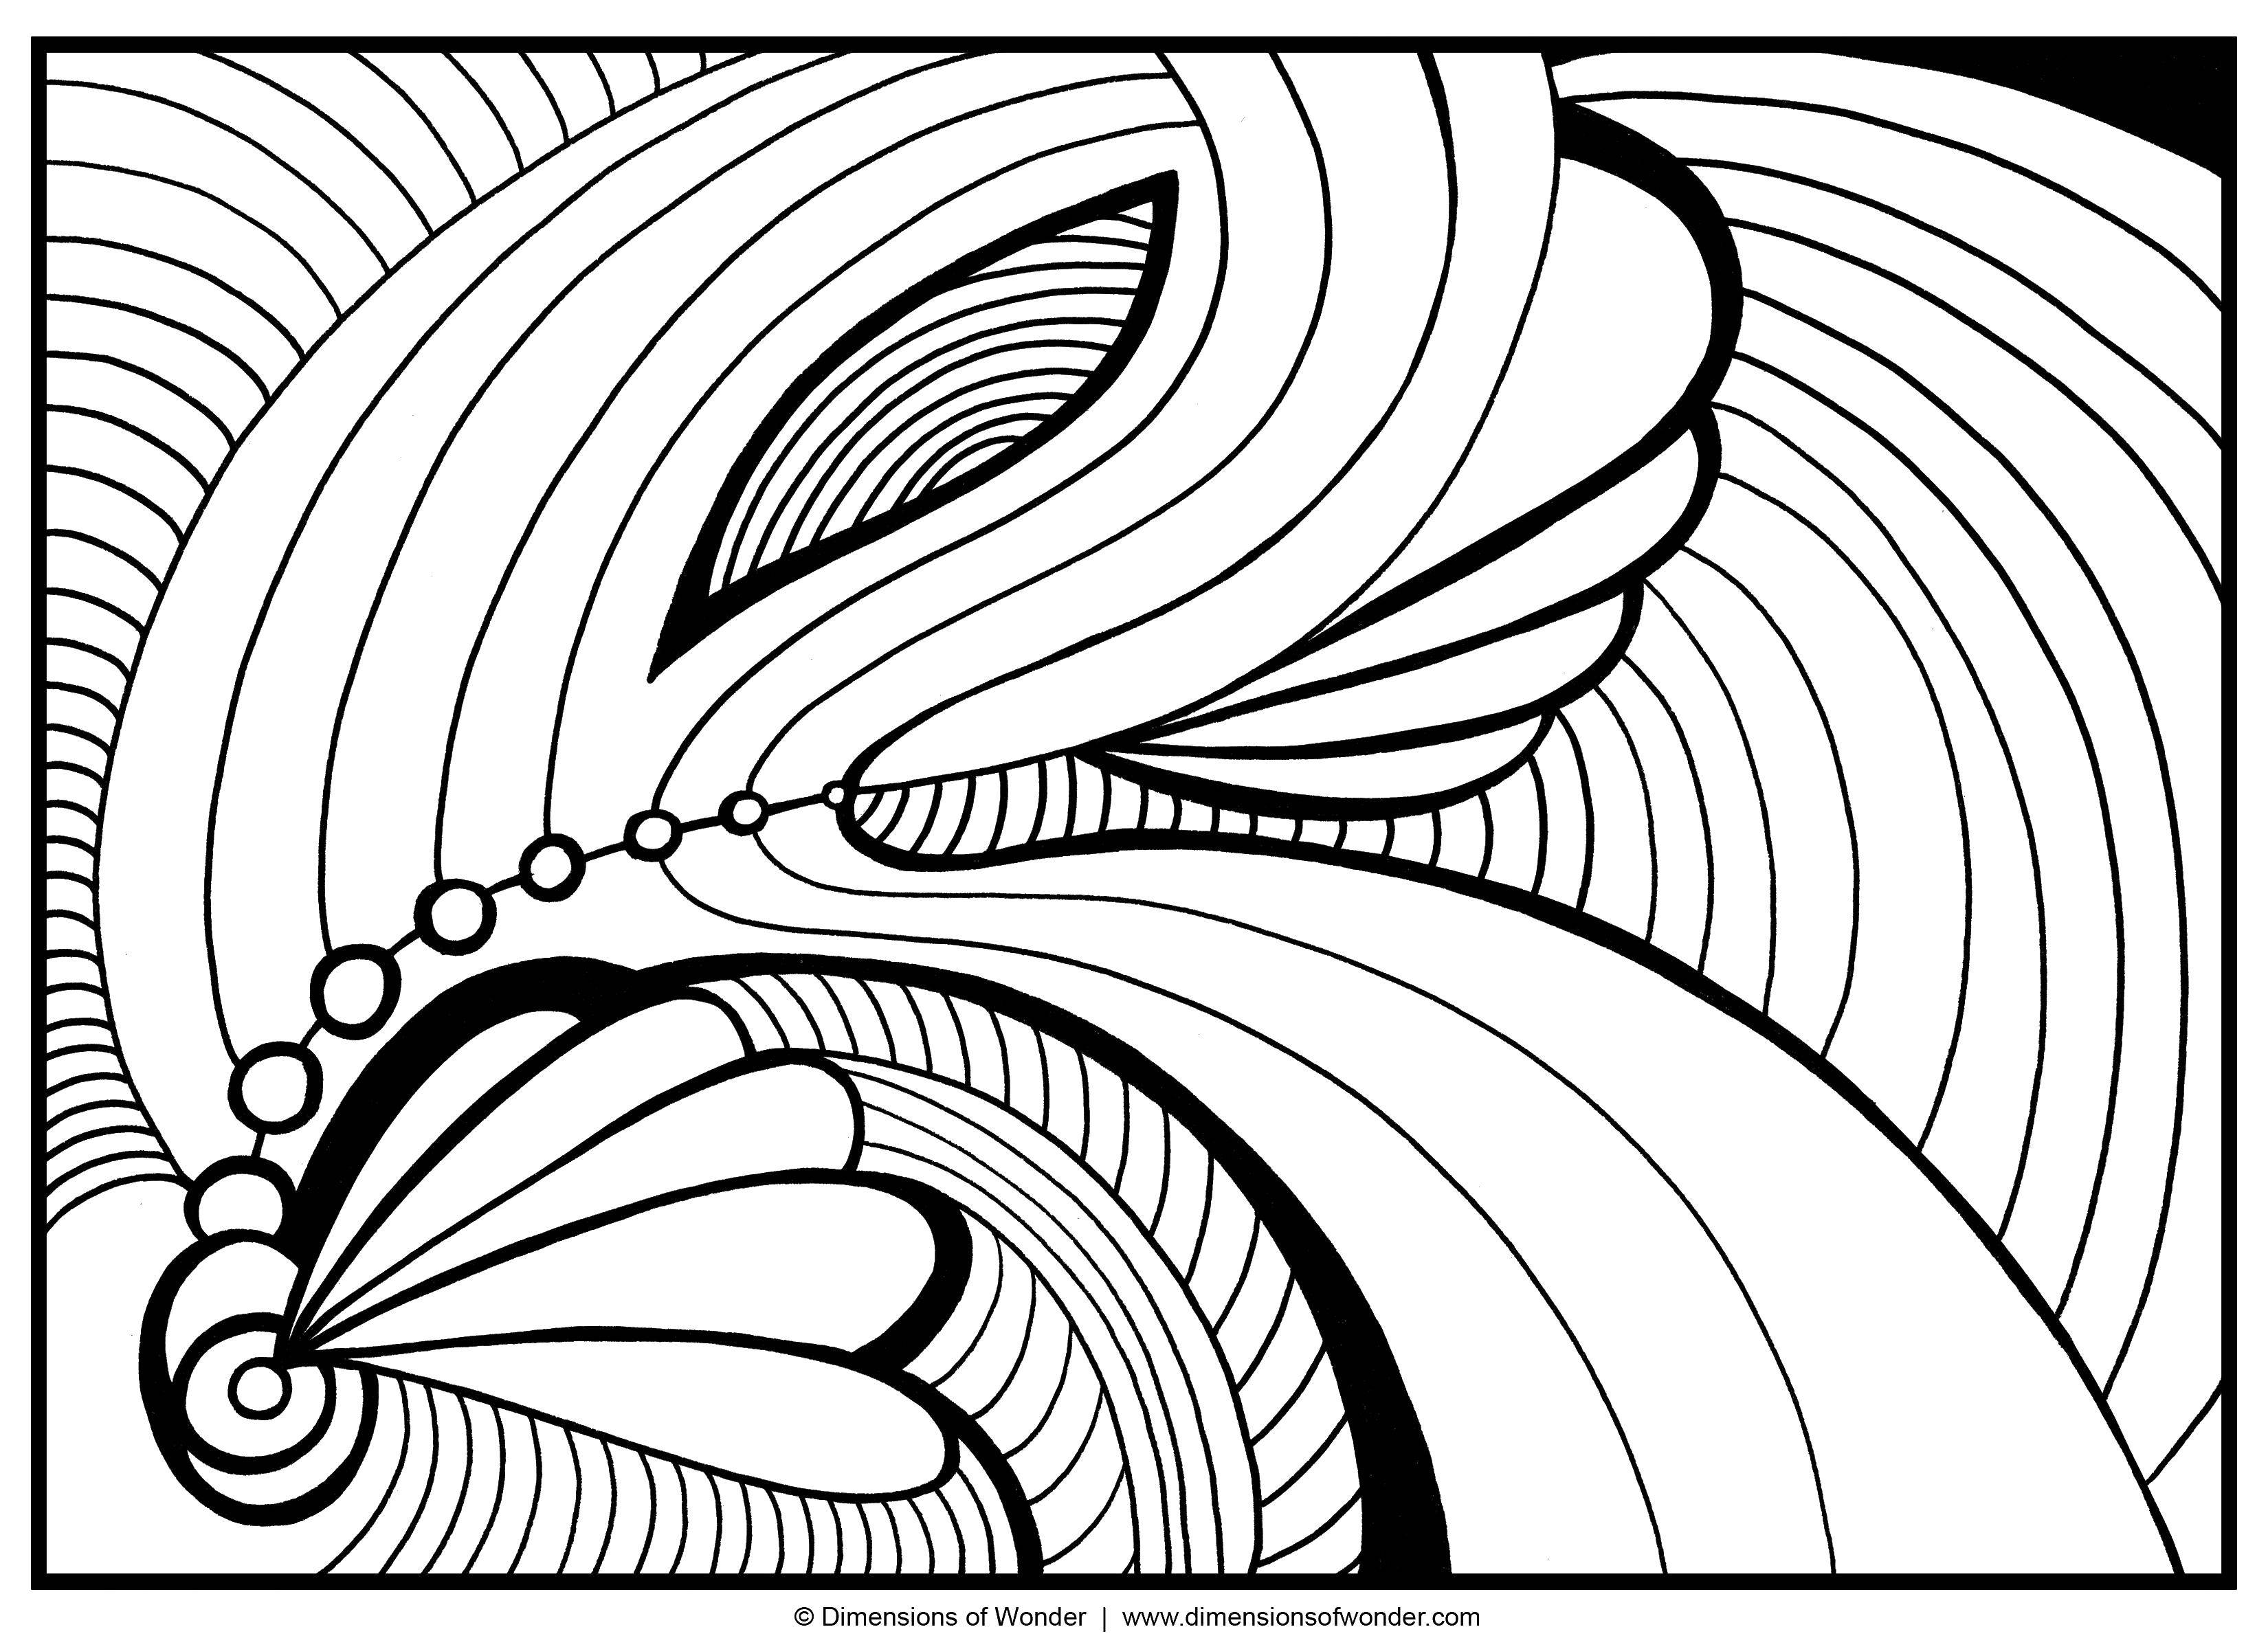 Coloring Shell, wave. Category coloring antistress. Tags:  the antistress, patterns, shapes, shell.